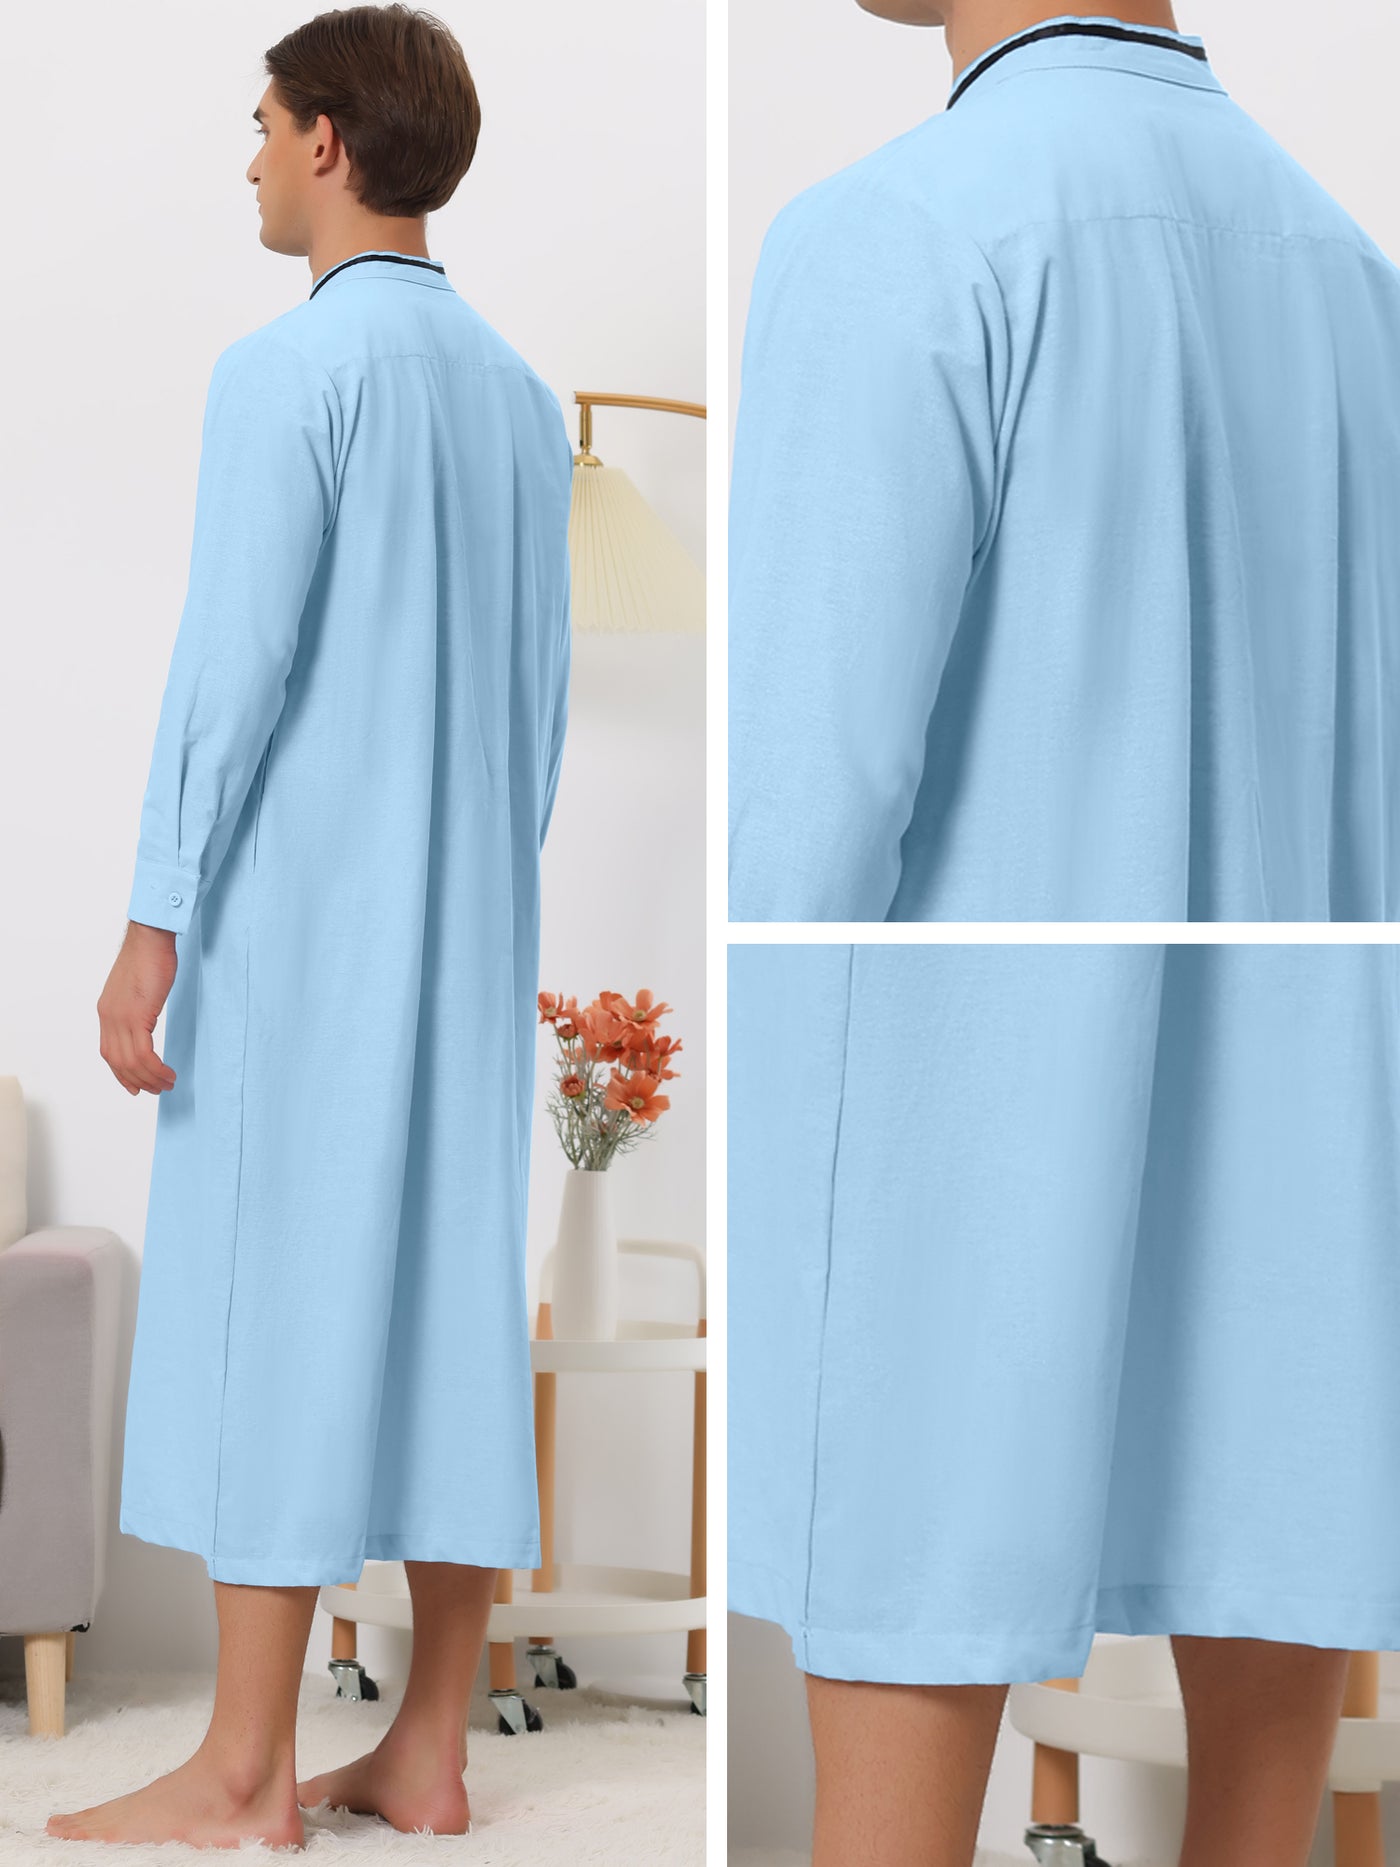 Bublédon Nightgown for Men's Contrast Color Stand Collar Long Sleeves Button Closure Nightshirts